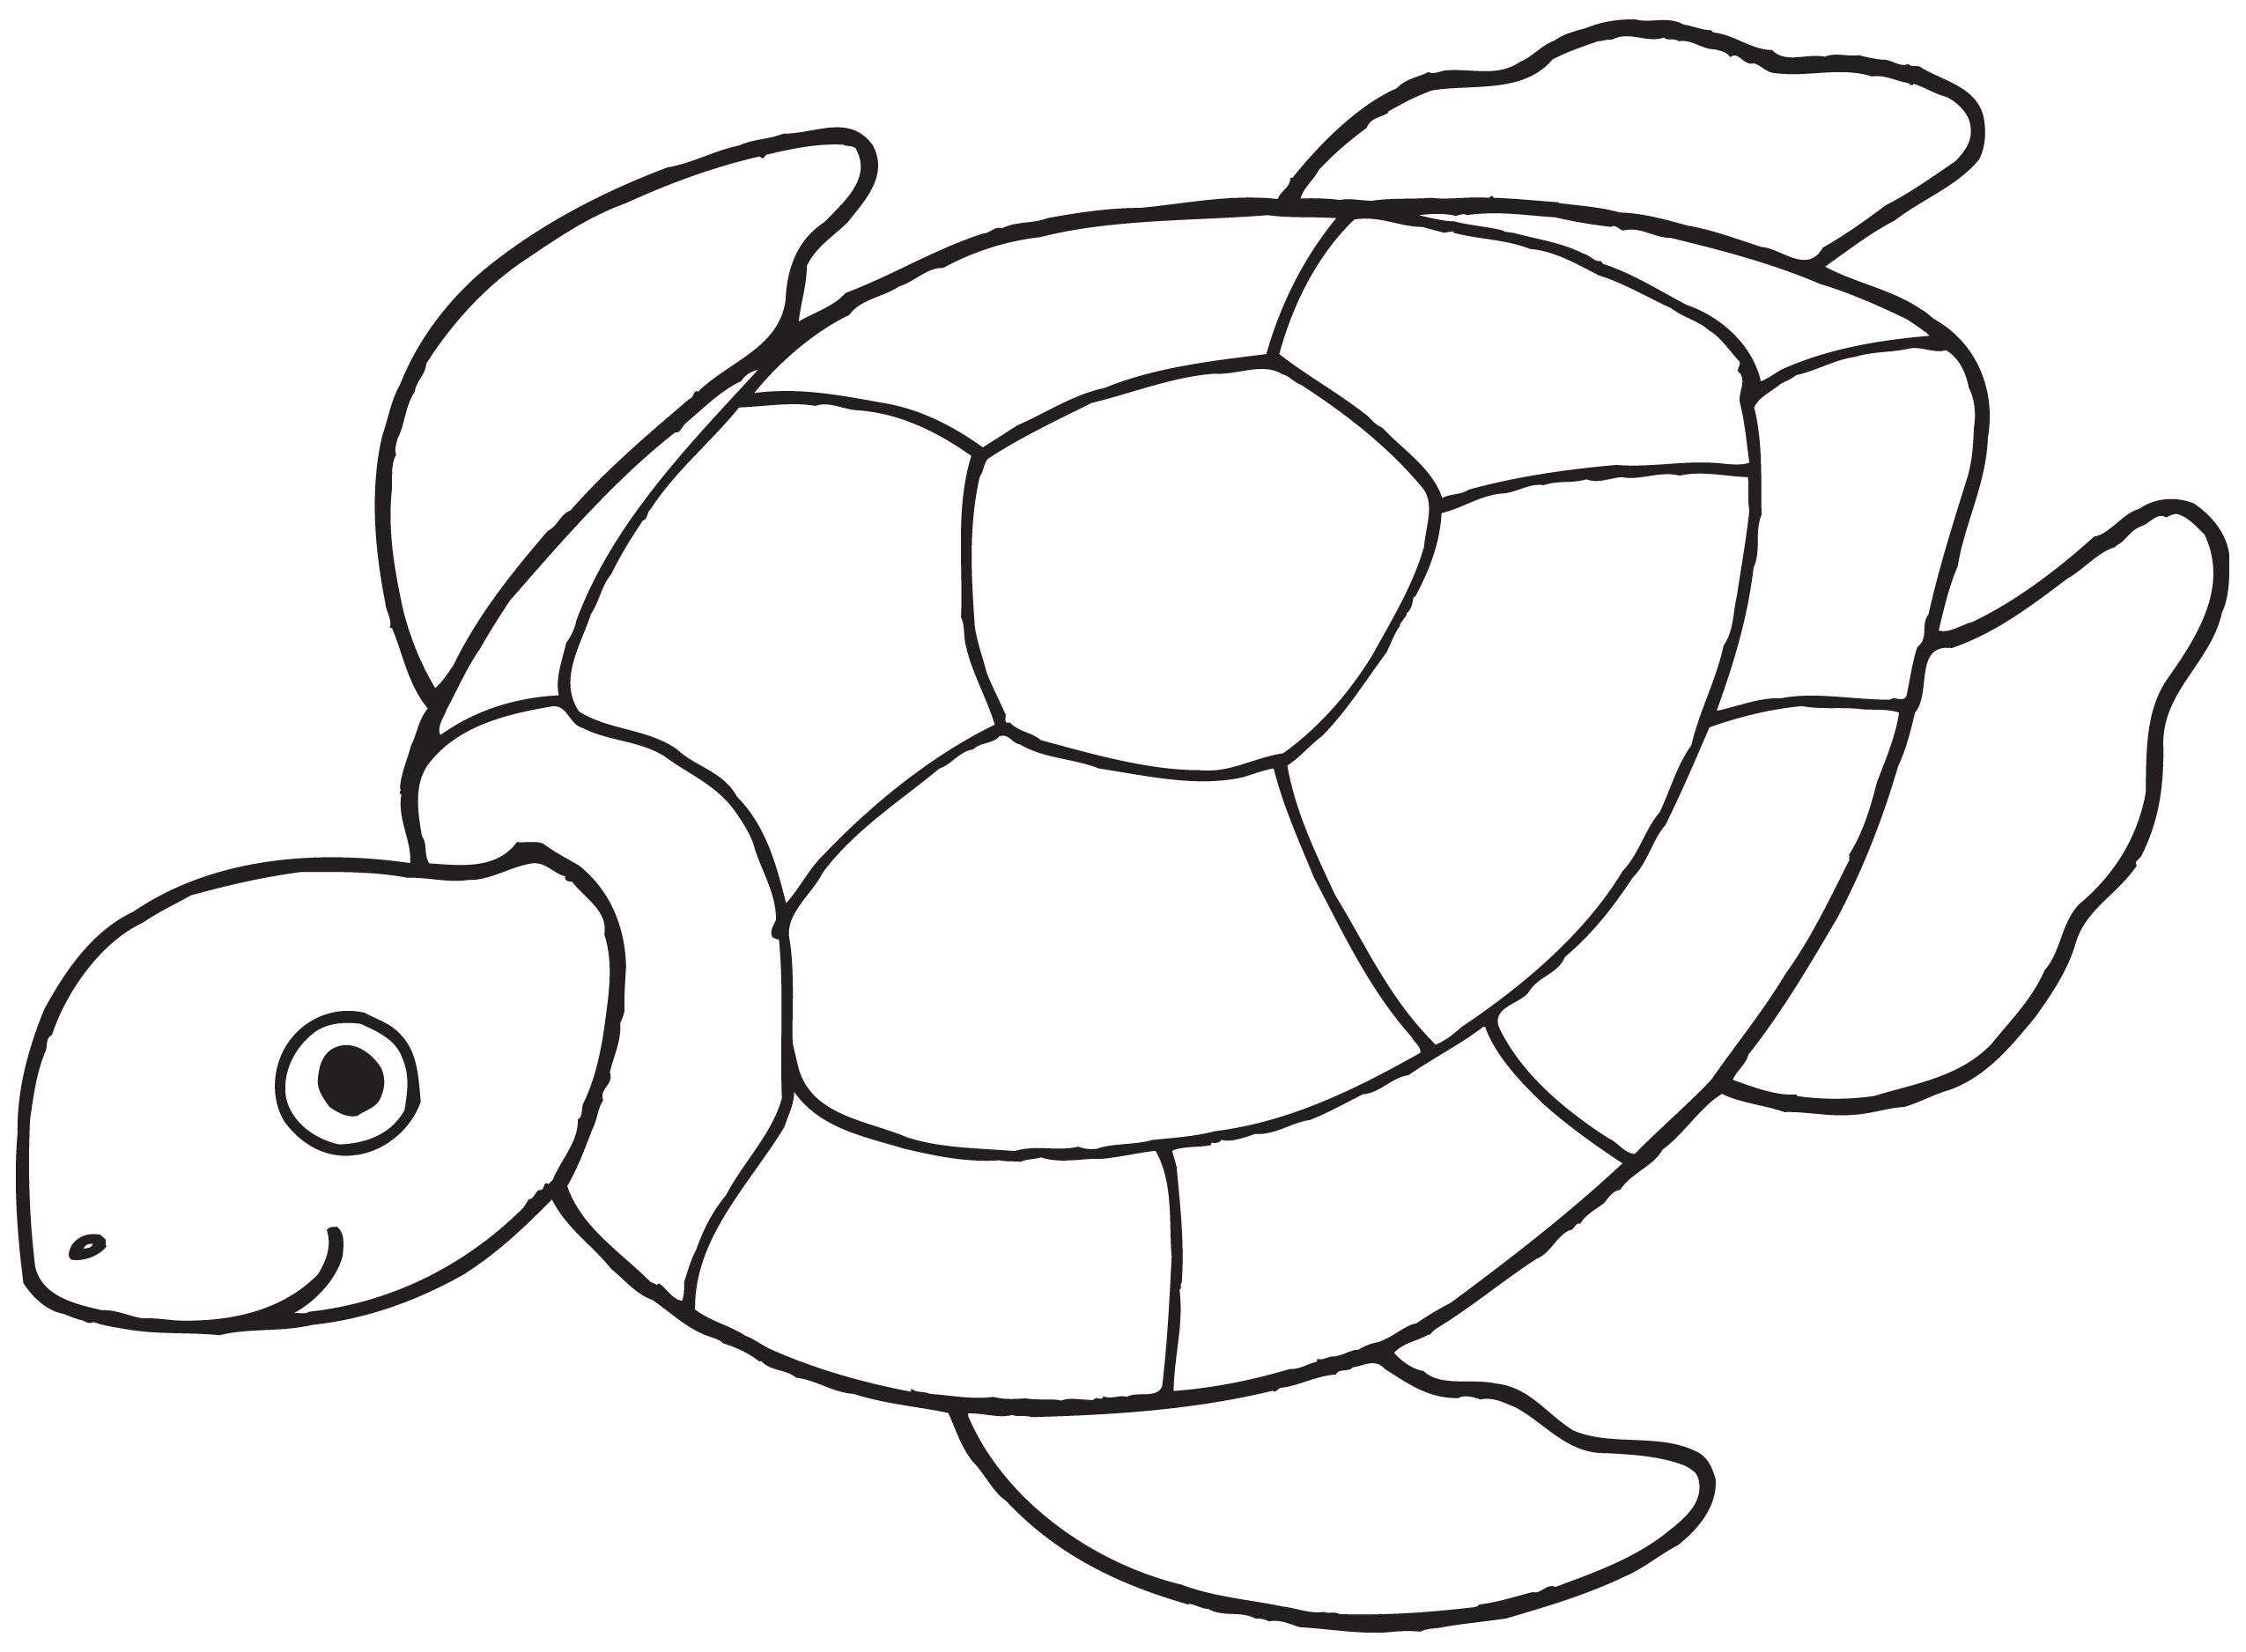 Simple Sea Turtle Drawing Free download on ClipArtMag